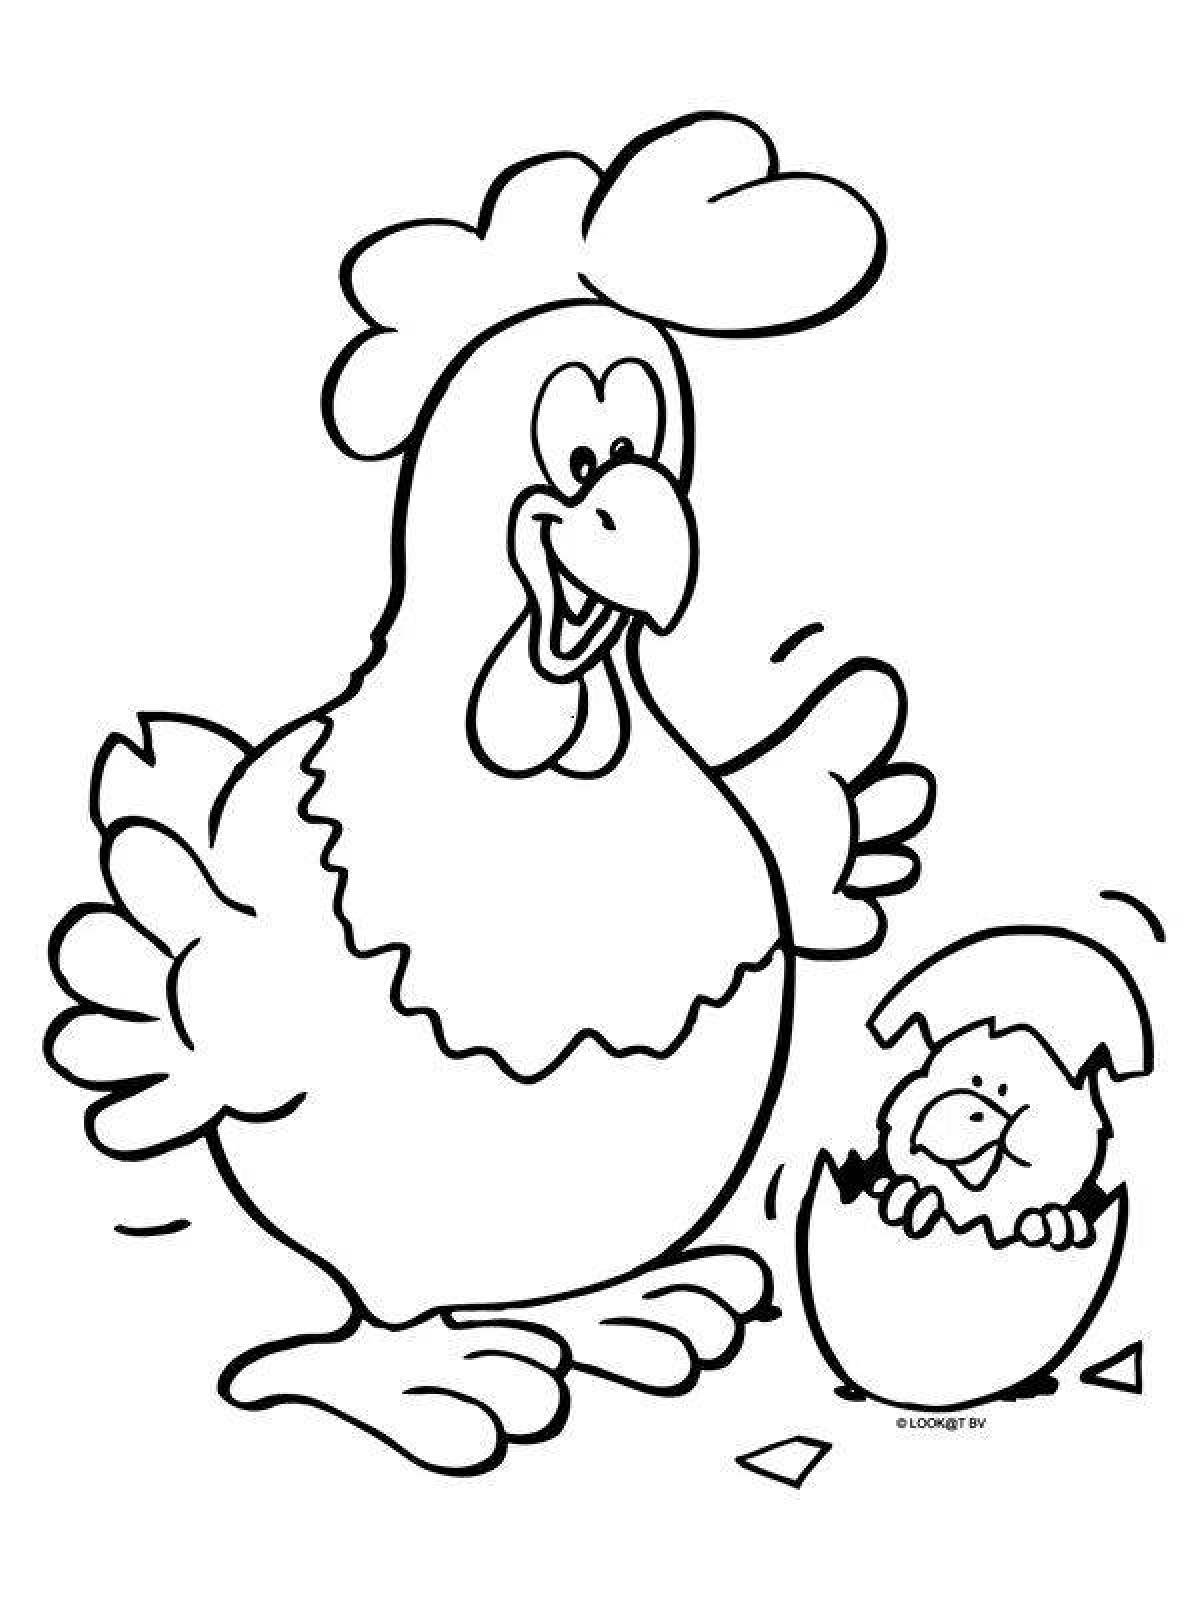 Chubby chicks coloring page